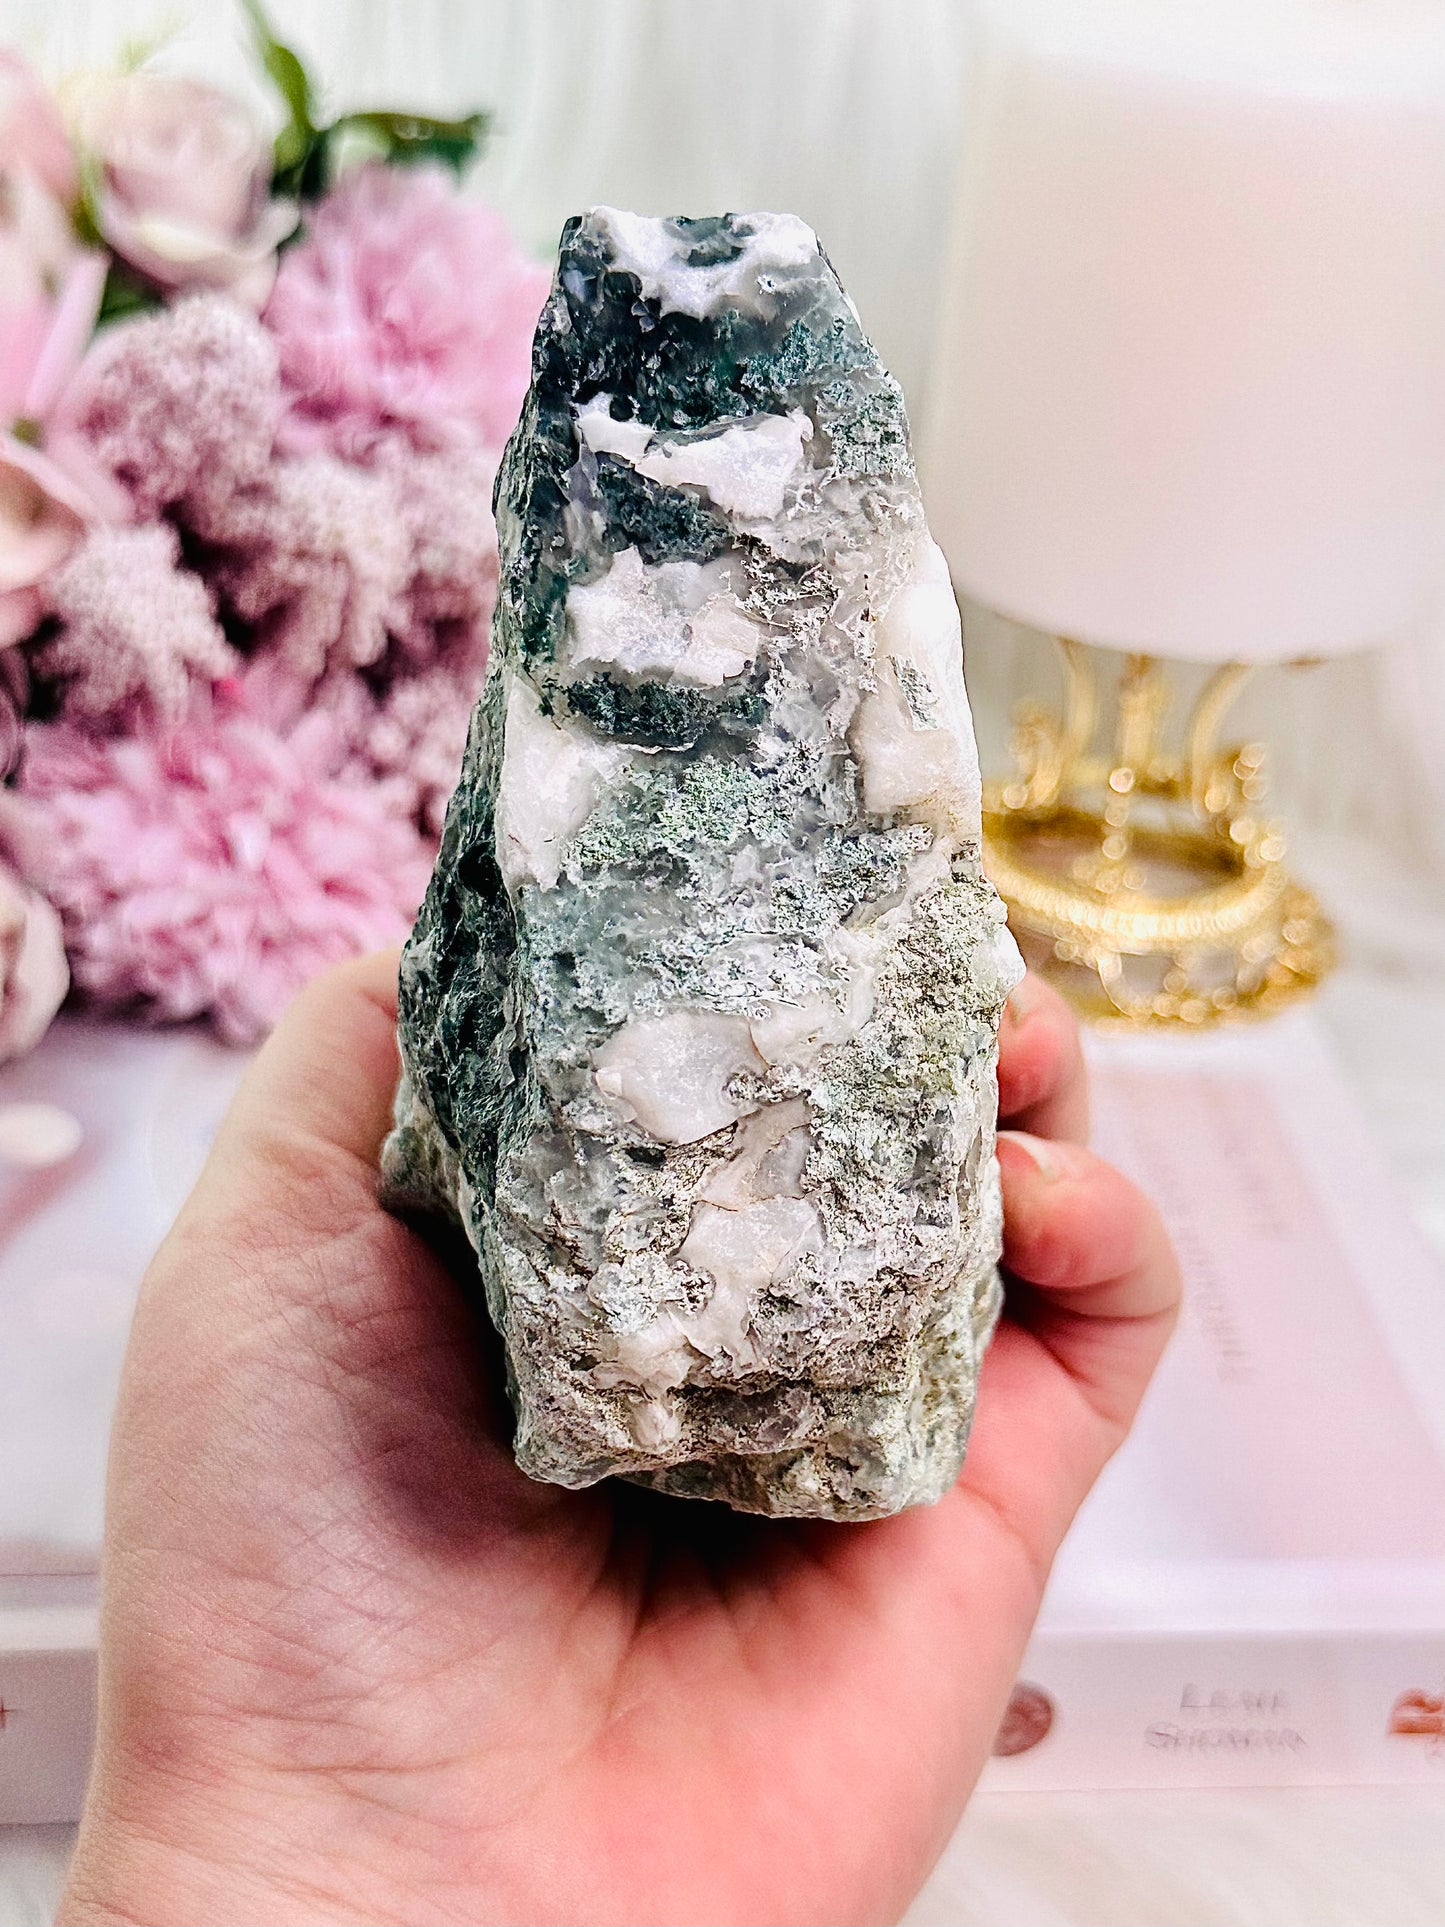 Peace & Tranquility ~ Beautiful Raw Natural Large 558gram Moss Agate Specimen